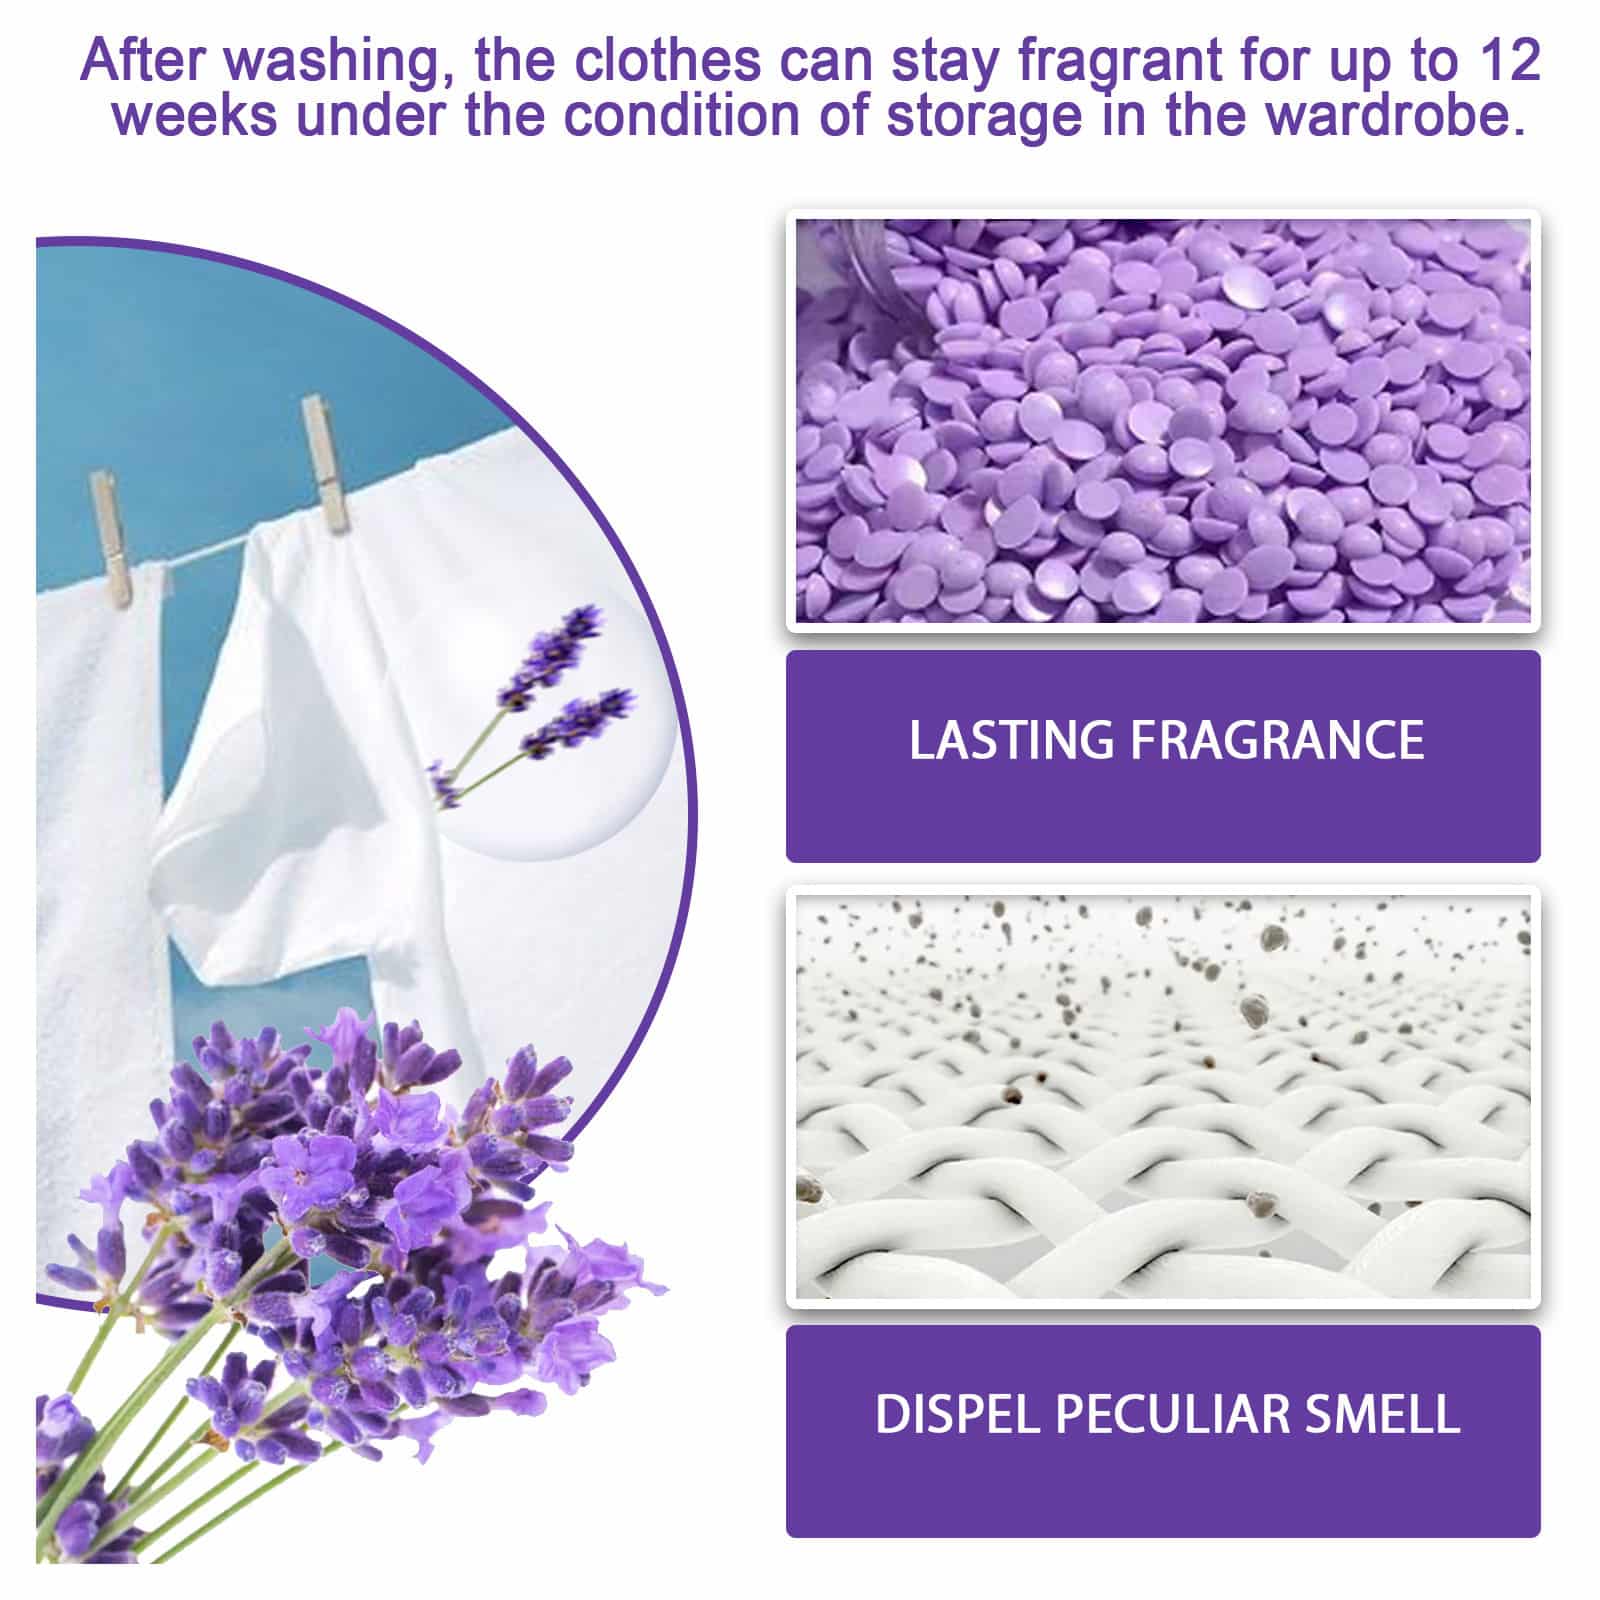 Lavender Laundry Aromatic Beads Clothes Lasting Fragrance Deodorant